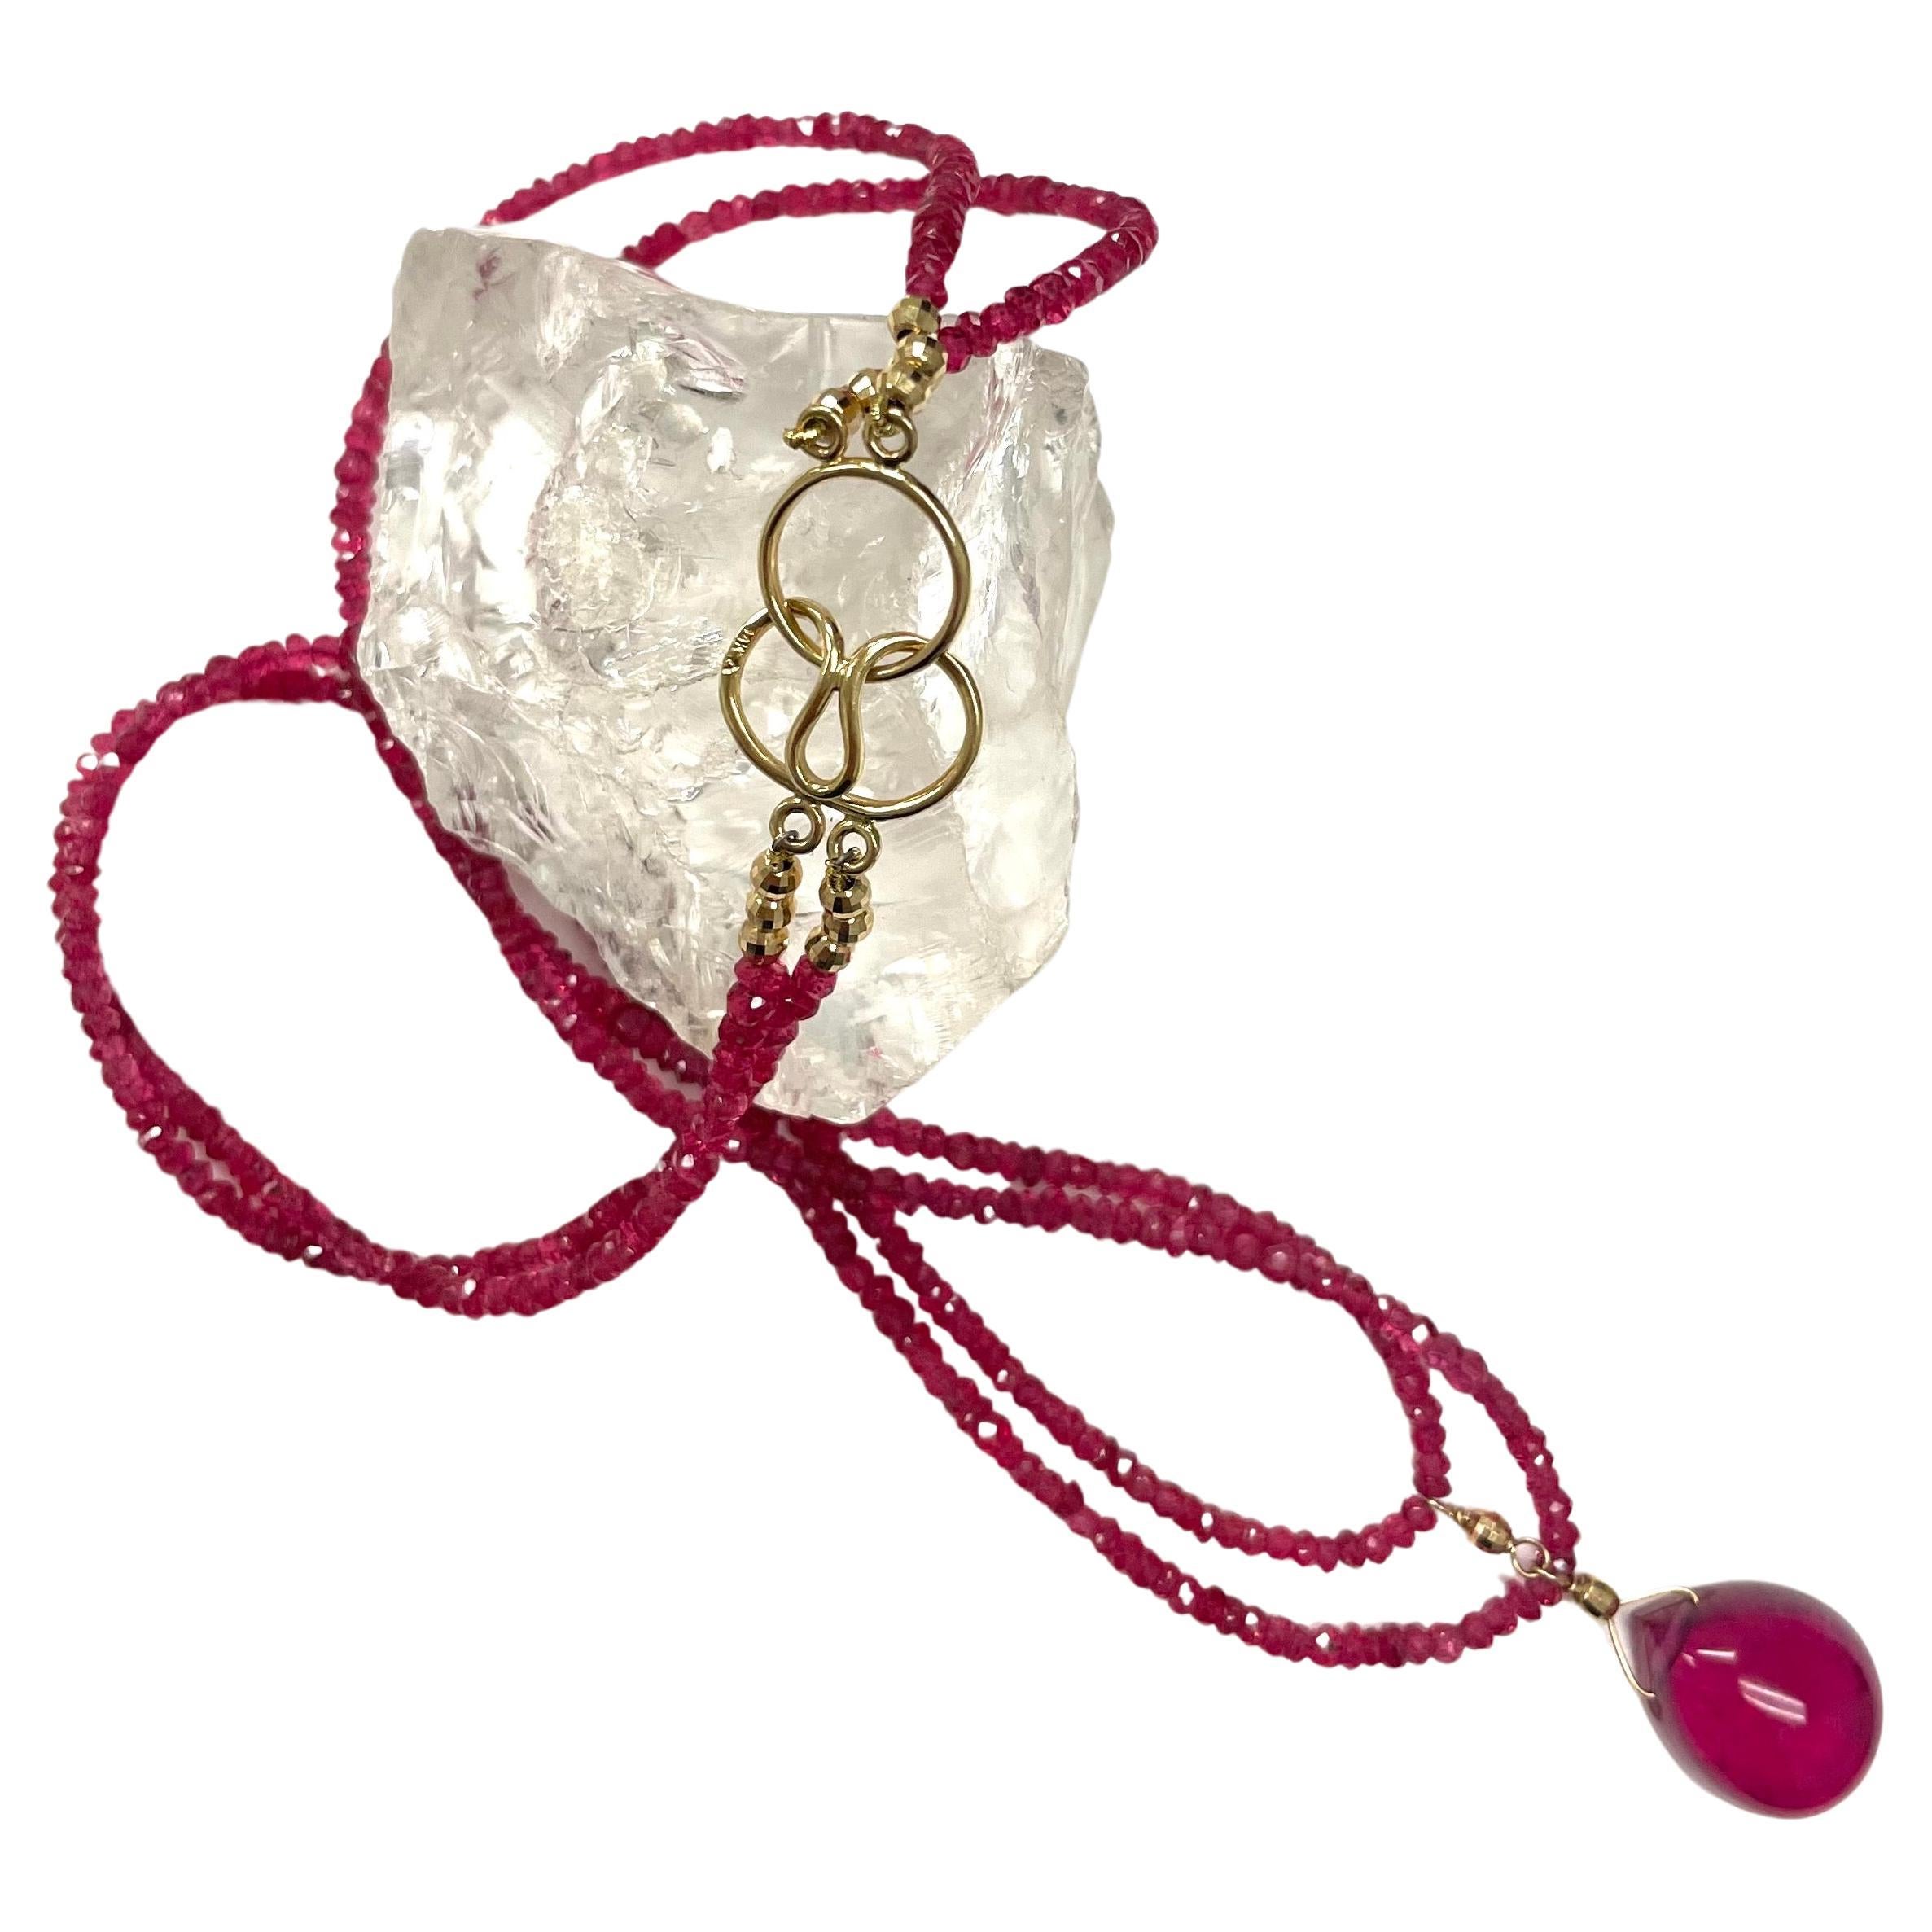 Description
Vibrant faceted pink spinel rondelles, adorned with an exquisite clear pear shape red rubellite tourmaline cabochon pendant and a user friendly 14k interlocking clasp. Item # N2682

Materials and Weight
Hot pink spinel, 62cts, 3mm,